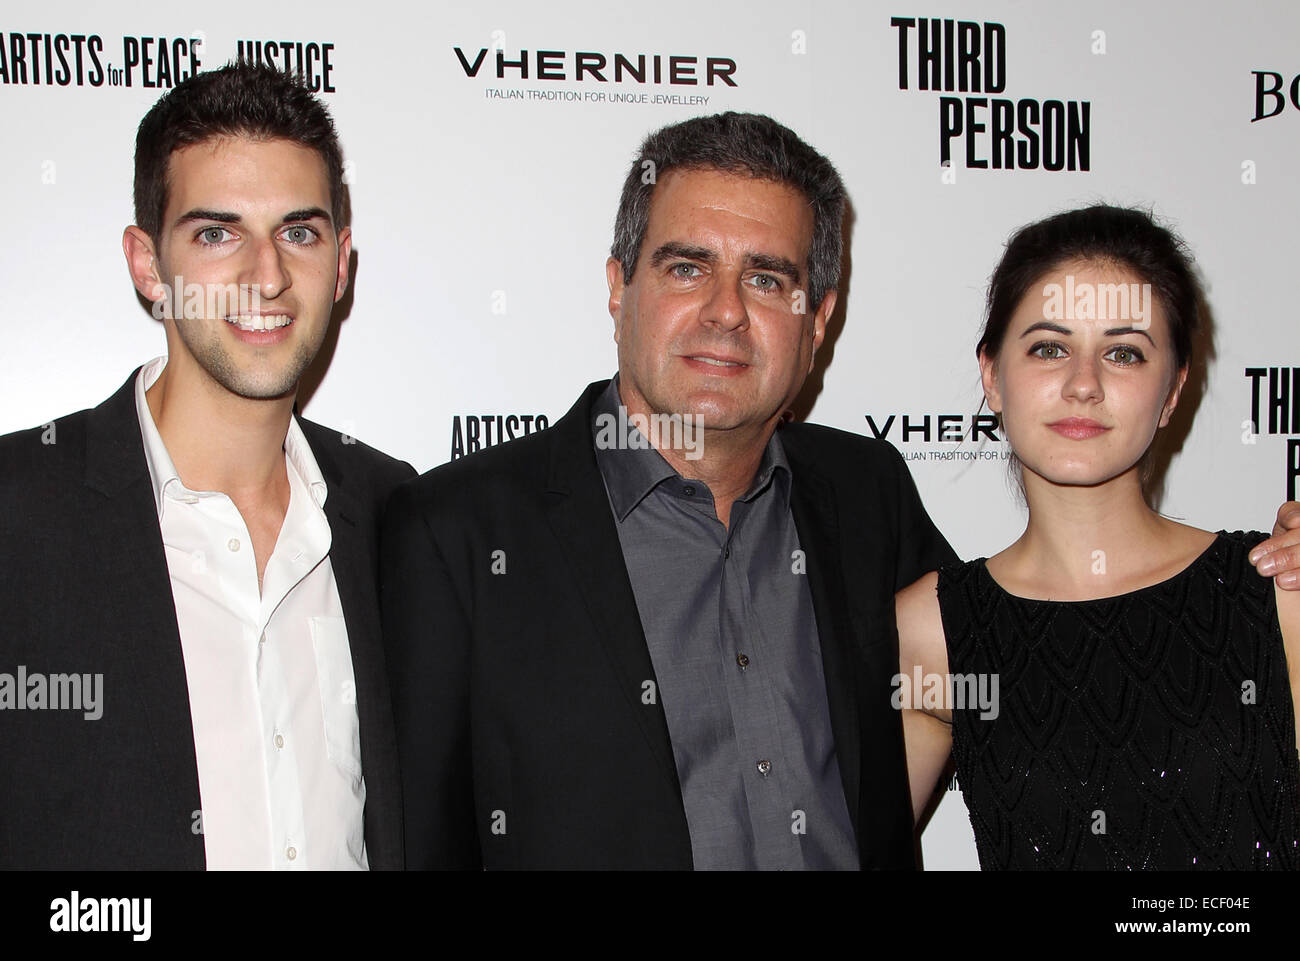 Los Angeles Premiere of 'Third Person' held at The Pickford Center for Motion Picture Studio / Linwood Dunn Theatre in Hollywood  Featuring: Michael Nozik,With his children Where: Los Angeles, California, United States When: 09 Jun 2014 Stock Photo